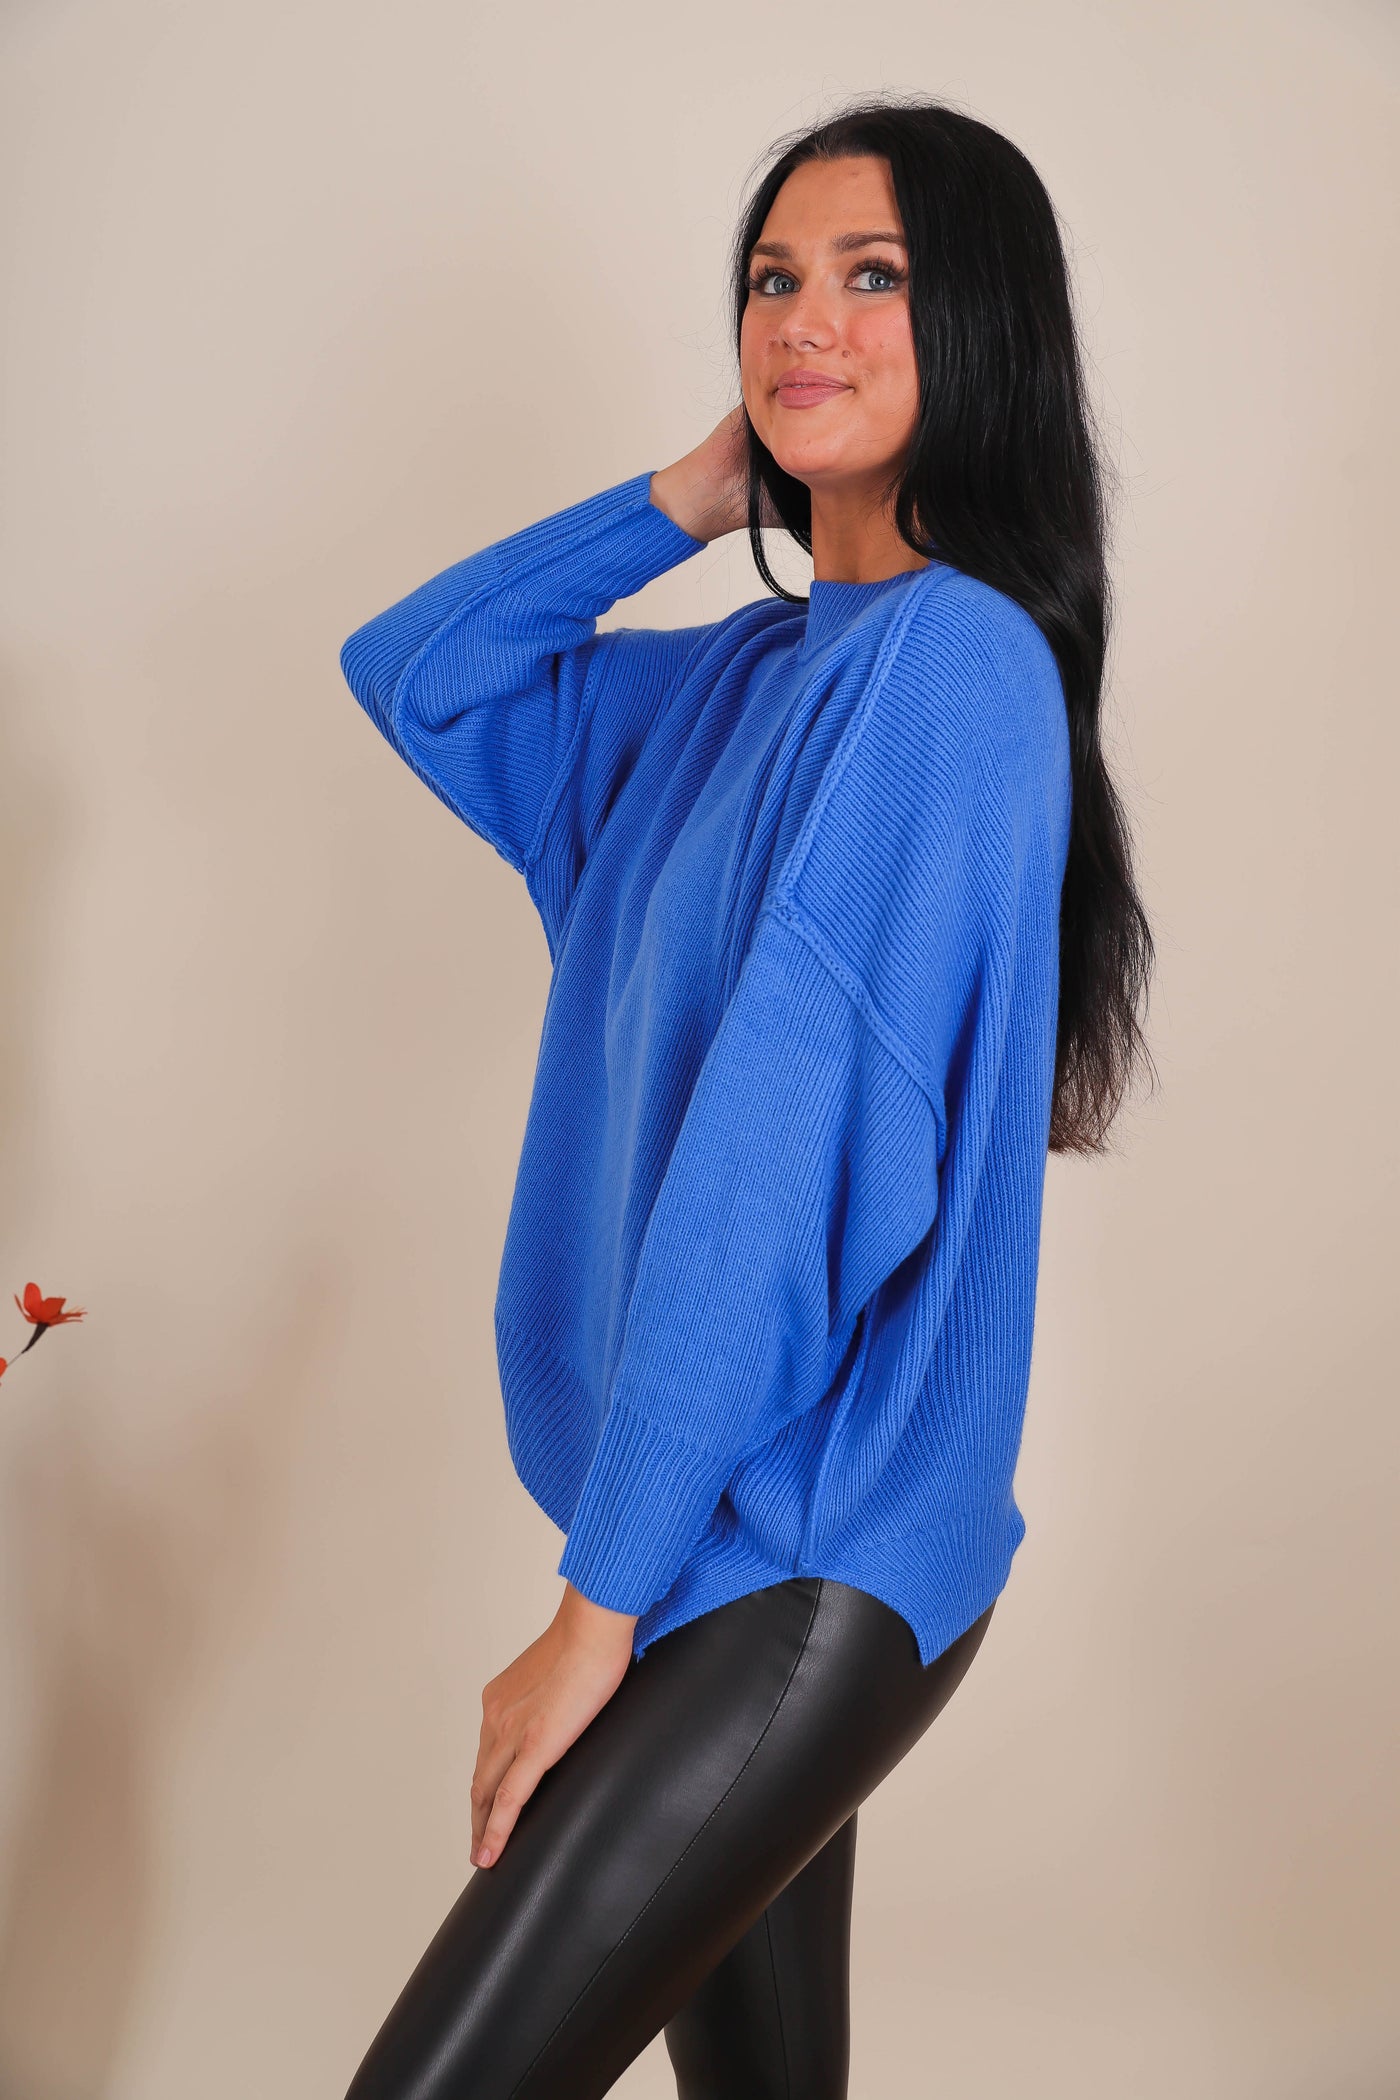 Women's Oversized Sweater- Bright Blue Sweater- Sweater For Leggings- Free People Sweater Dupe